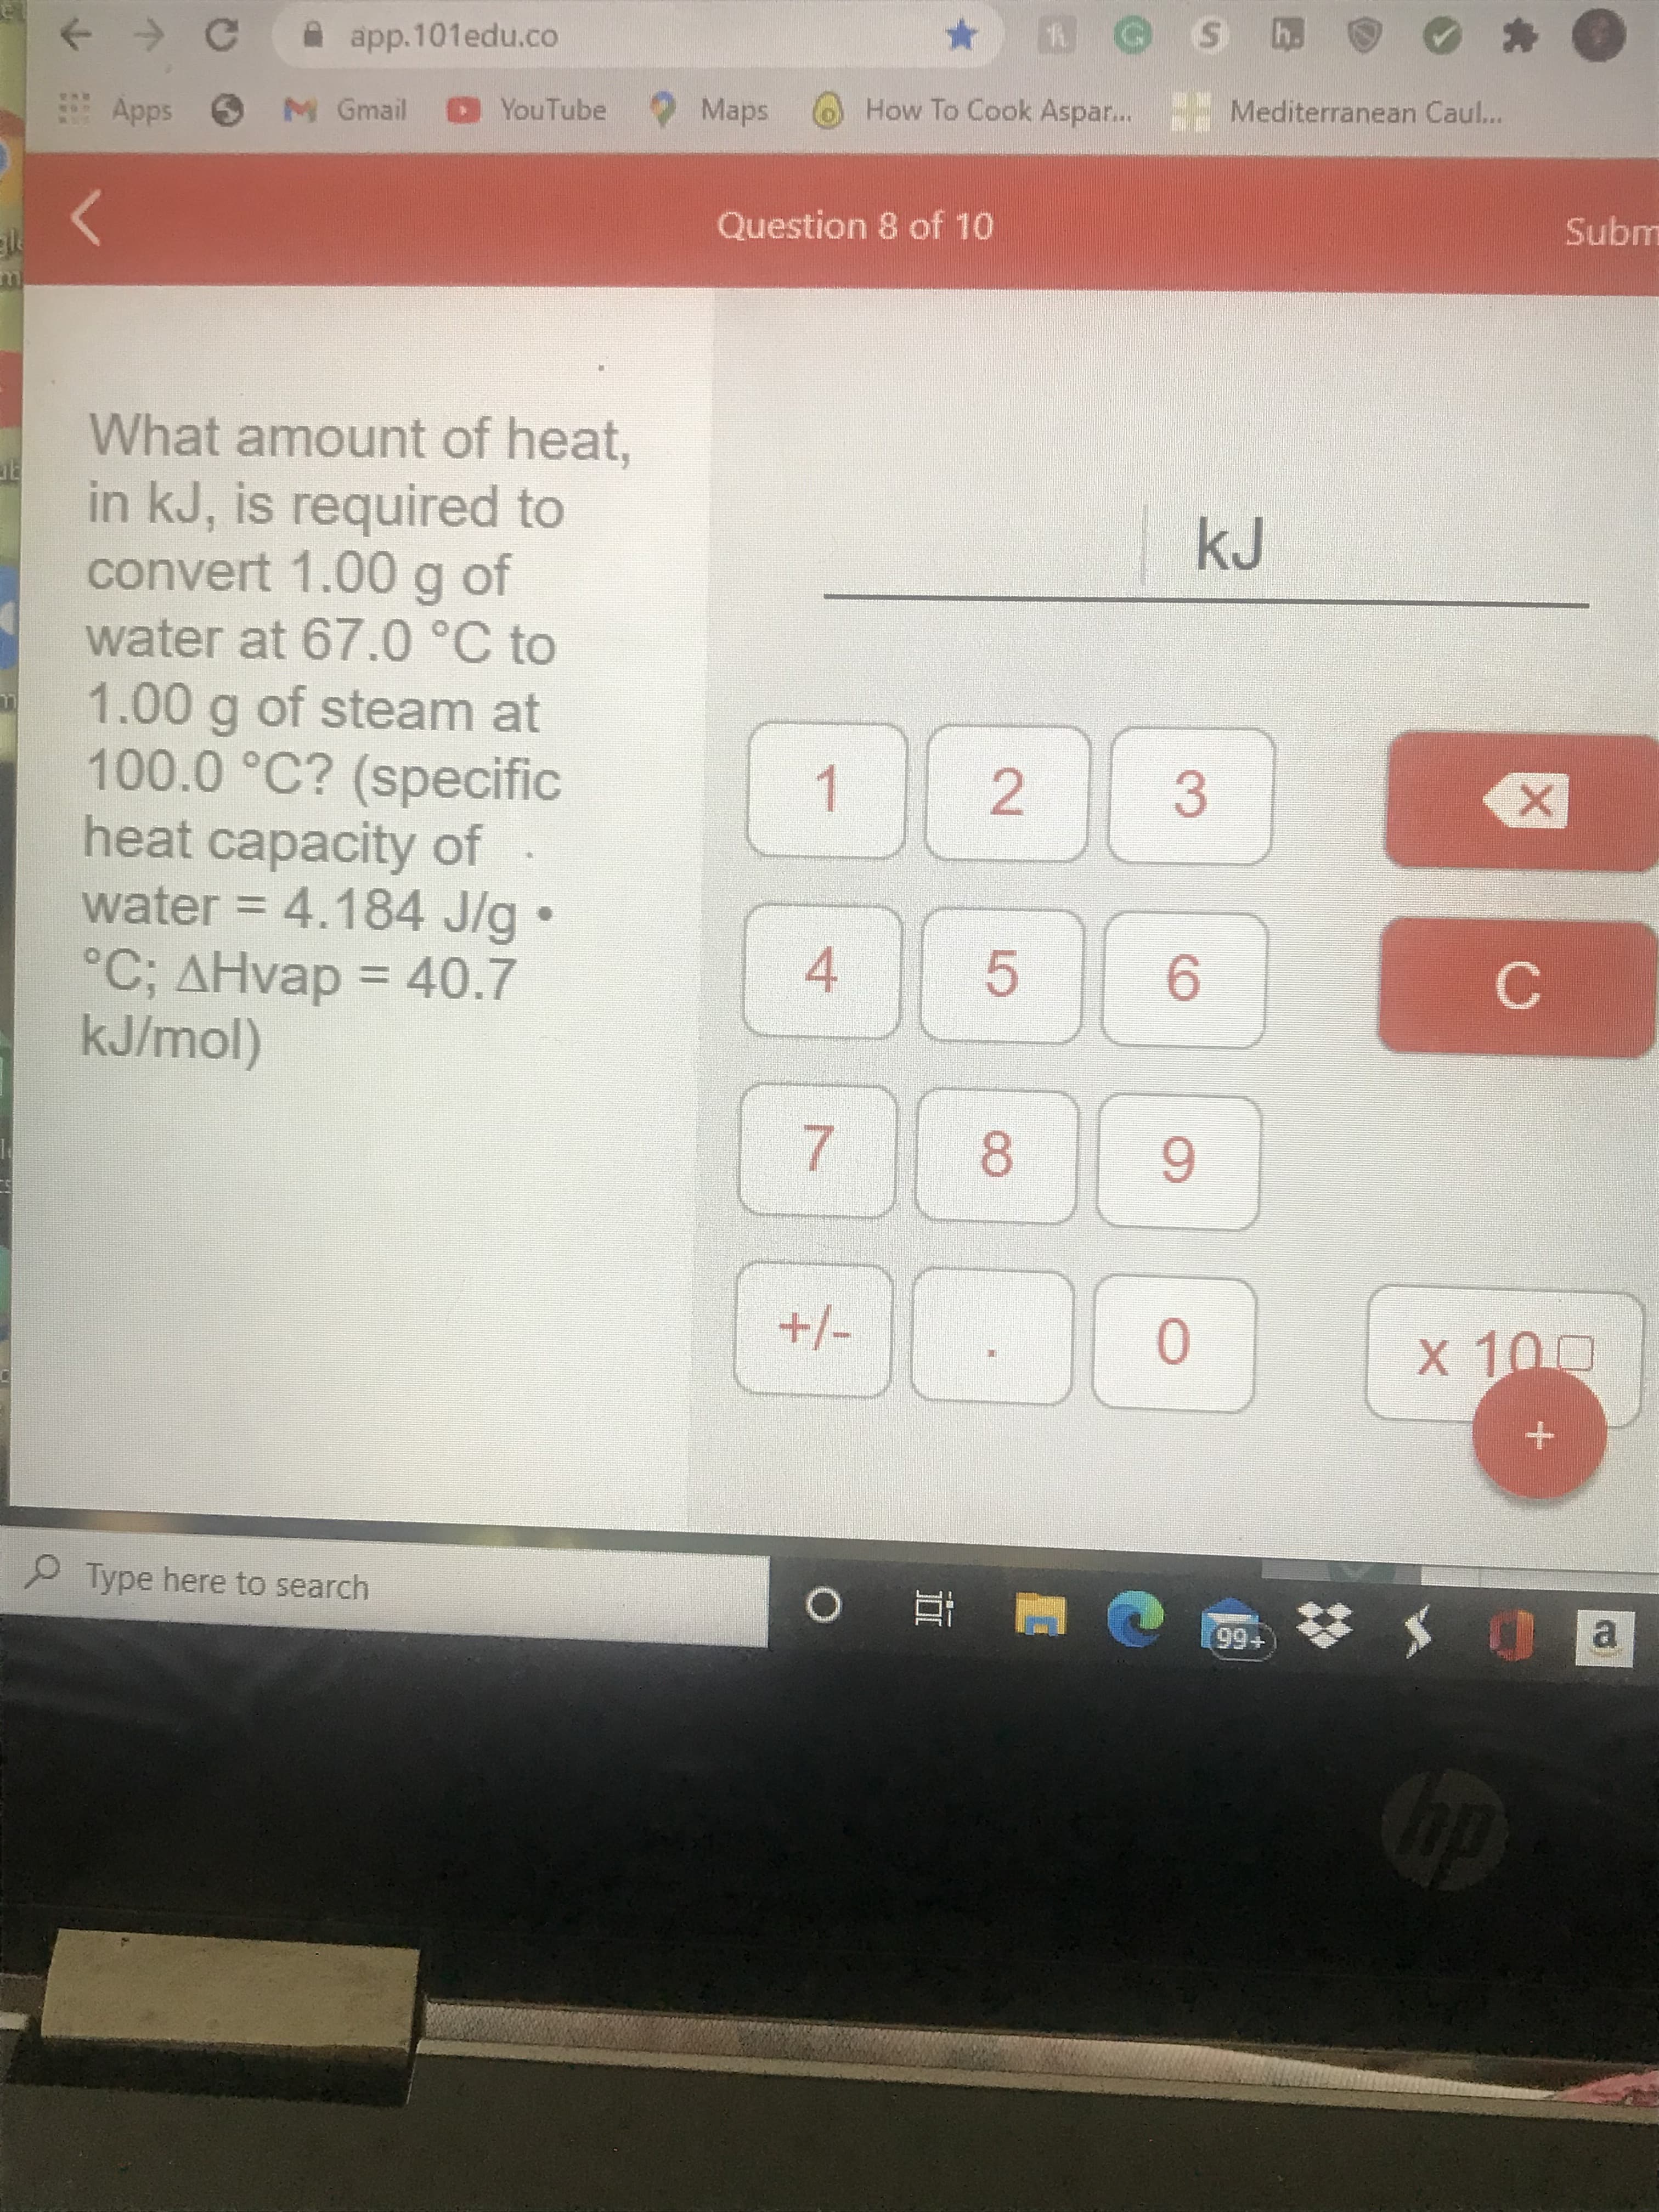 What amount of heat,
in kJ, is required to
convert 1.00g of
water at 67.0°C to
1.00g of steam at
100.0 °C? (specific
heat capacity of
water = 4.184 J/g
°C; AHvap = 40.7
kJ/mol)
%3D
%3D
